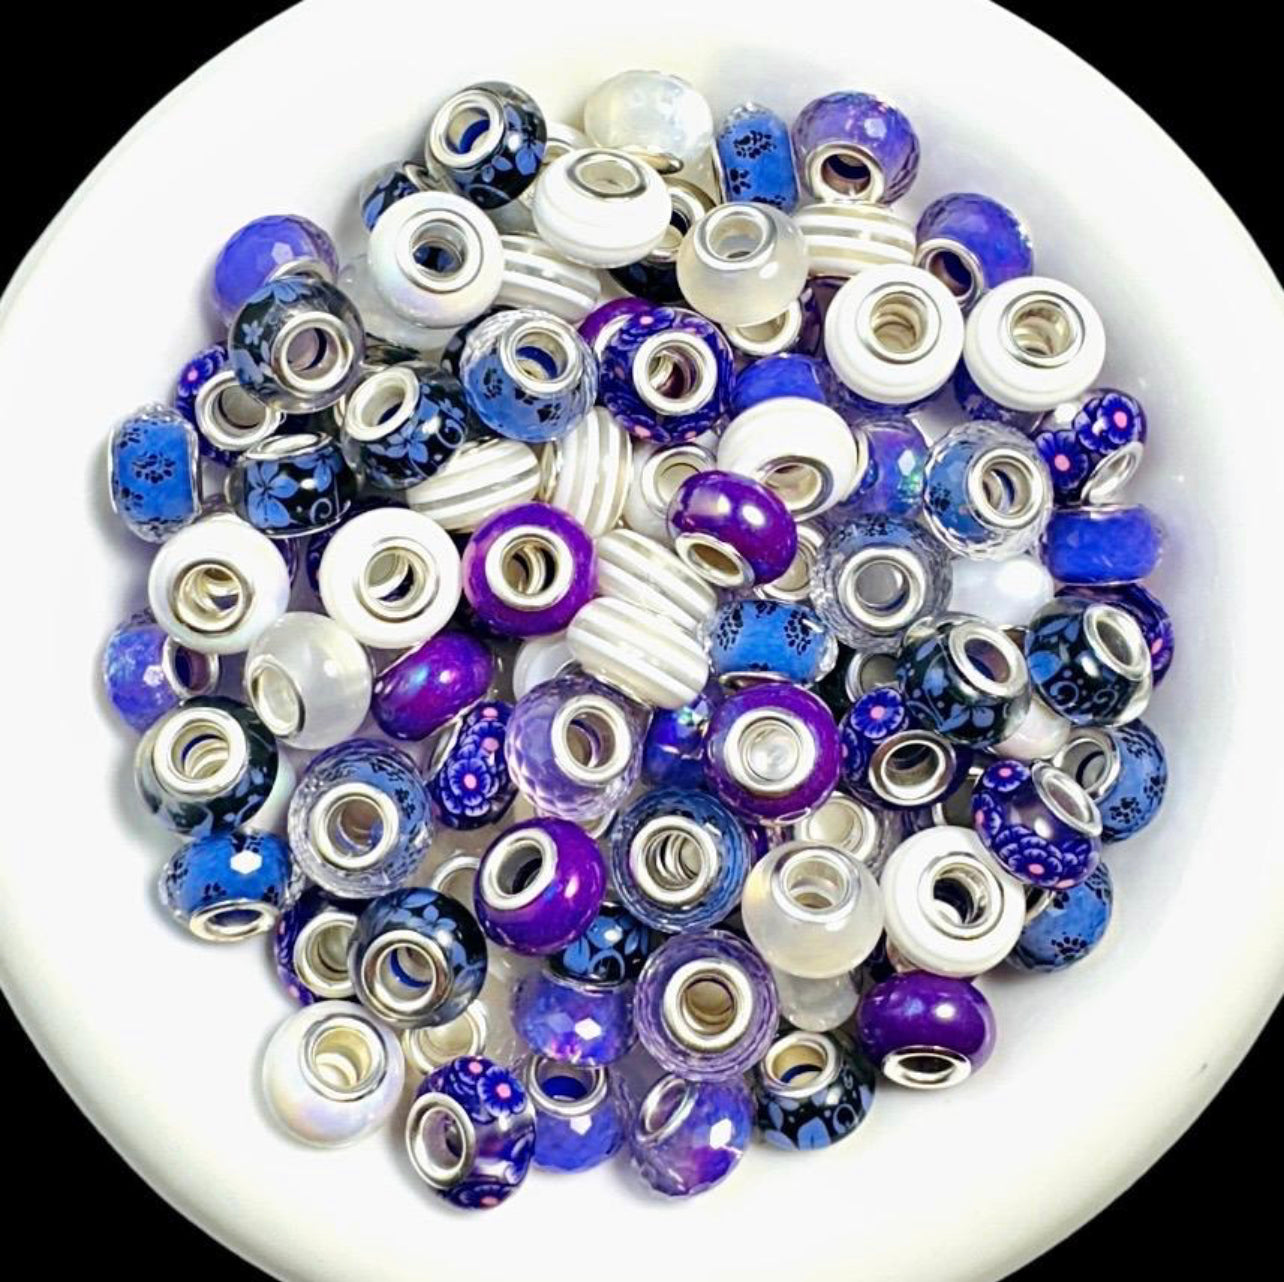 NEW! Beads for bracelet making - DIY Spacer Beads and Pen and Bracelet Makings